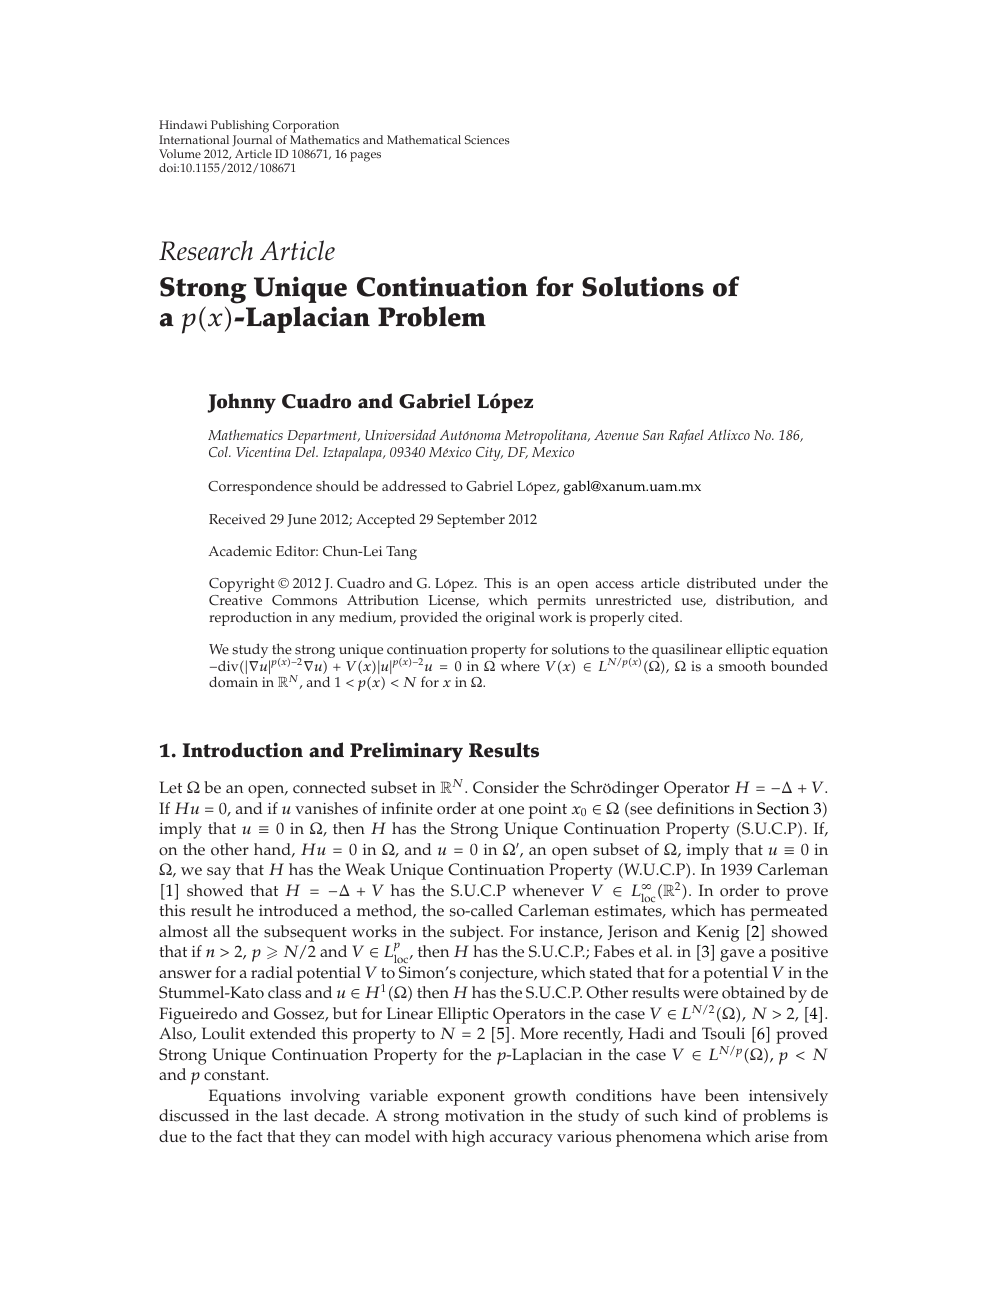 Strong Unique Continuation For Solutions Of A P X Laplacian Problem Topic Of Research Paper In Mathematics Download Scholarly Article Pdf And Read For Free On Cyberleninka Open Science Hub